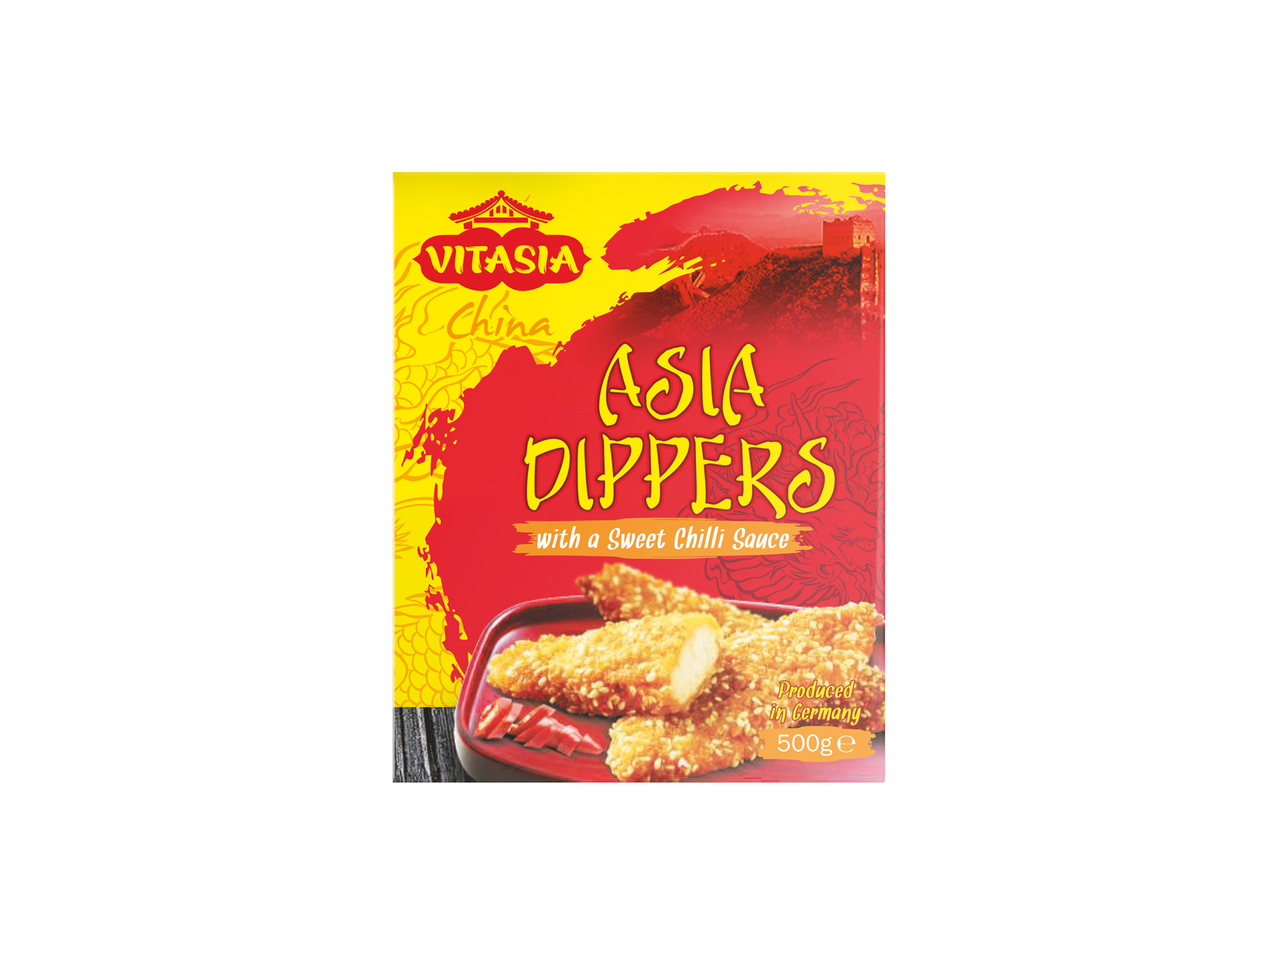 Asia dippers